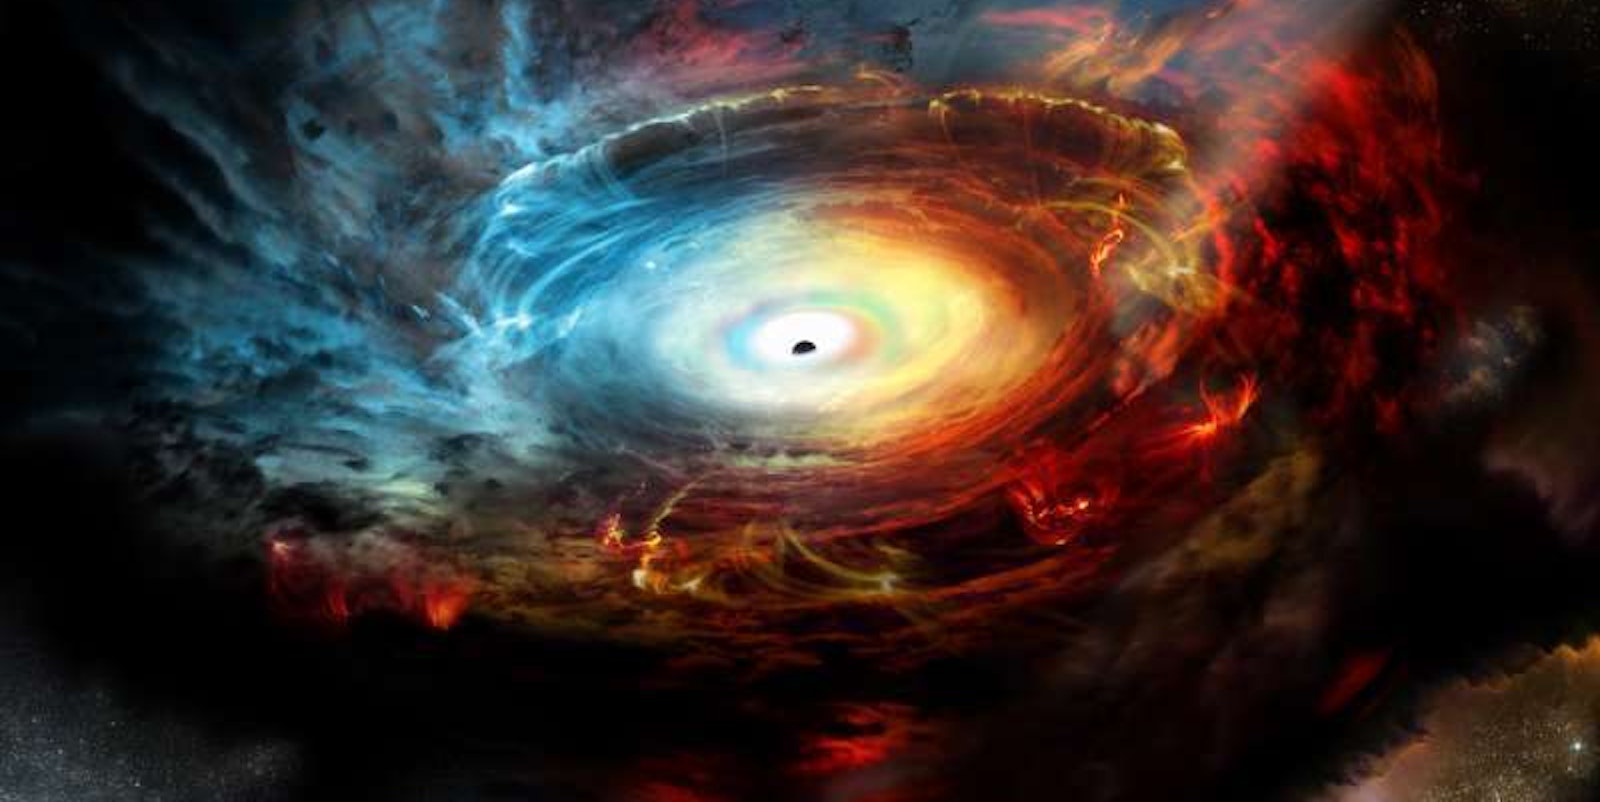 Artist's impression of the black hole at the center of Messier 77.